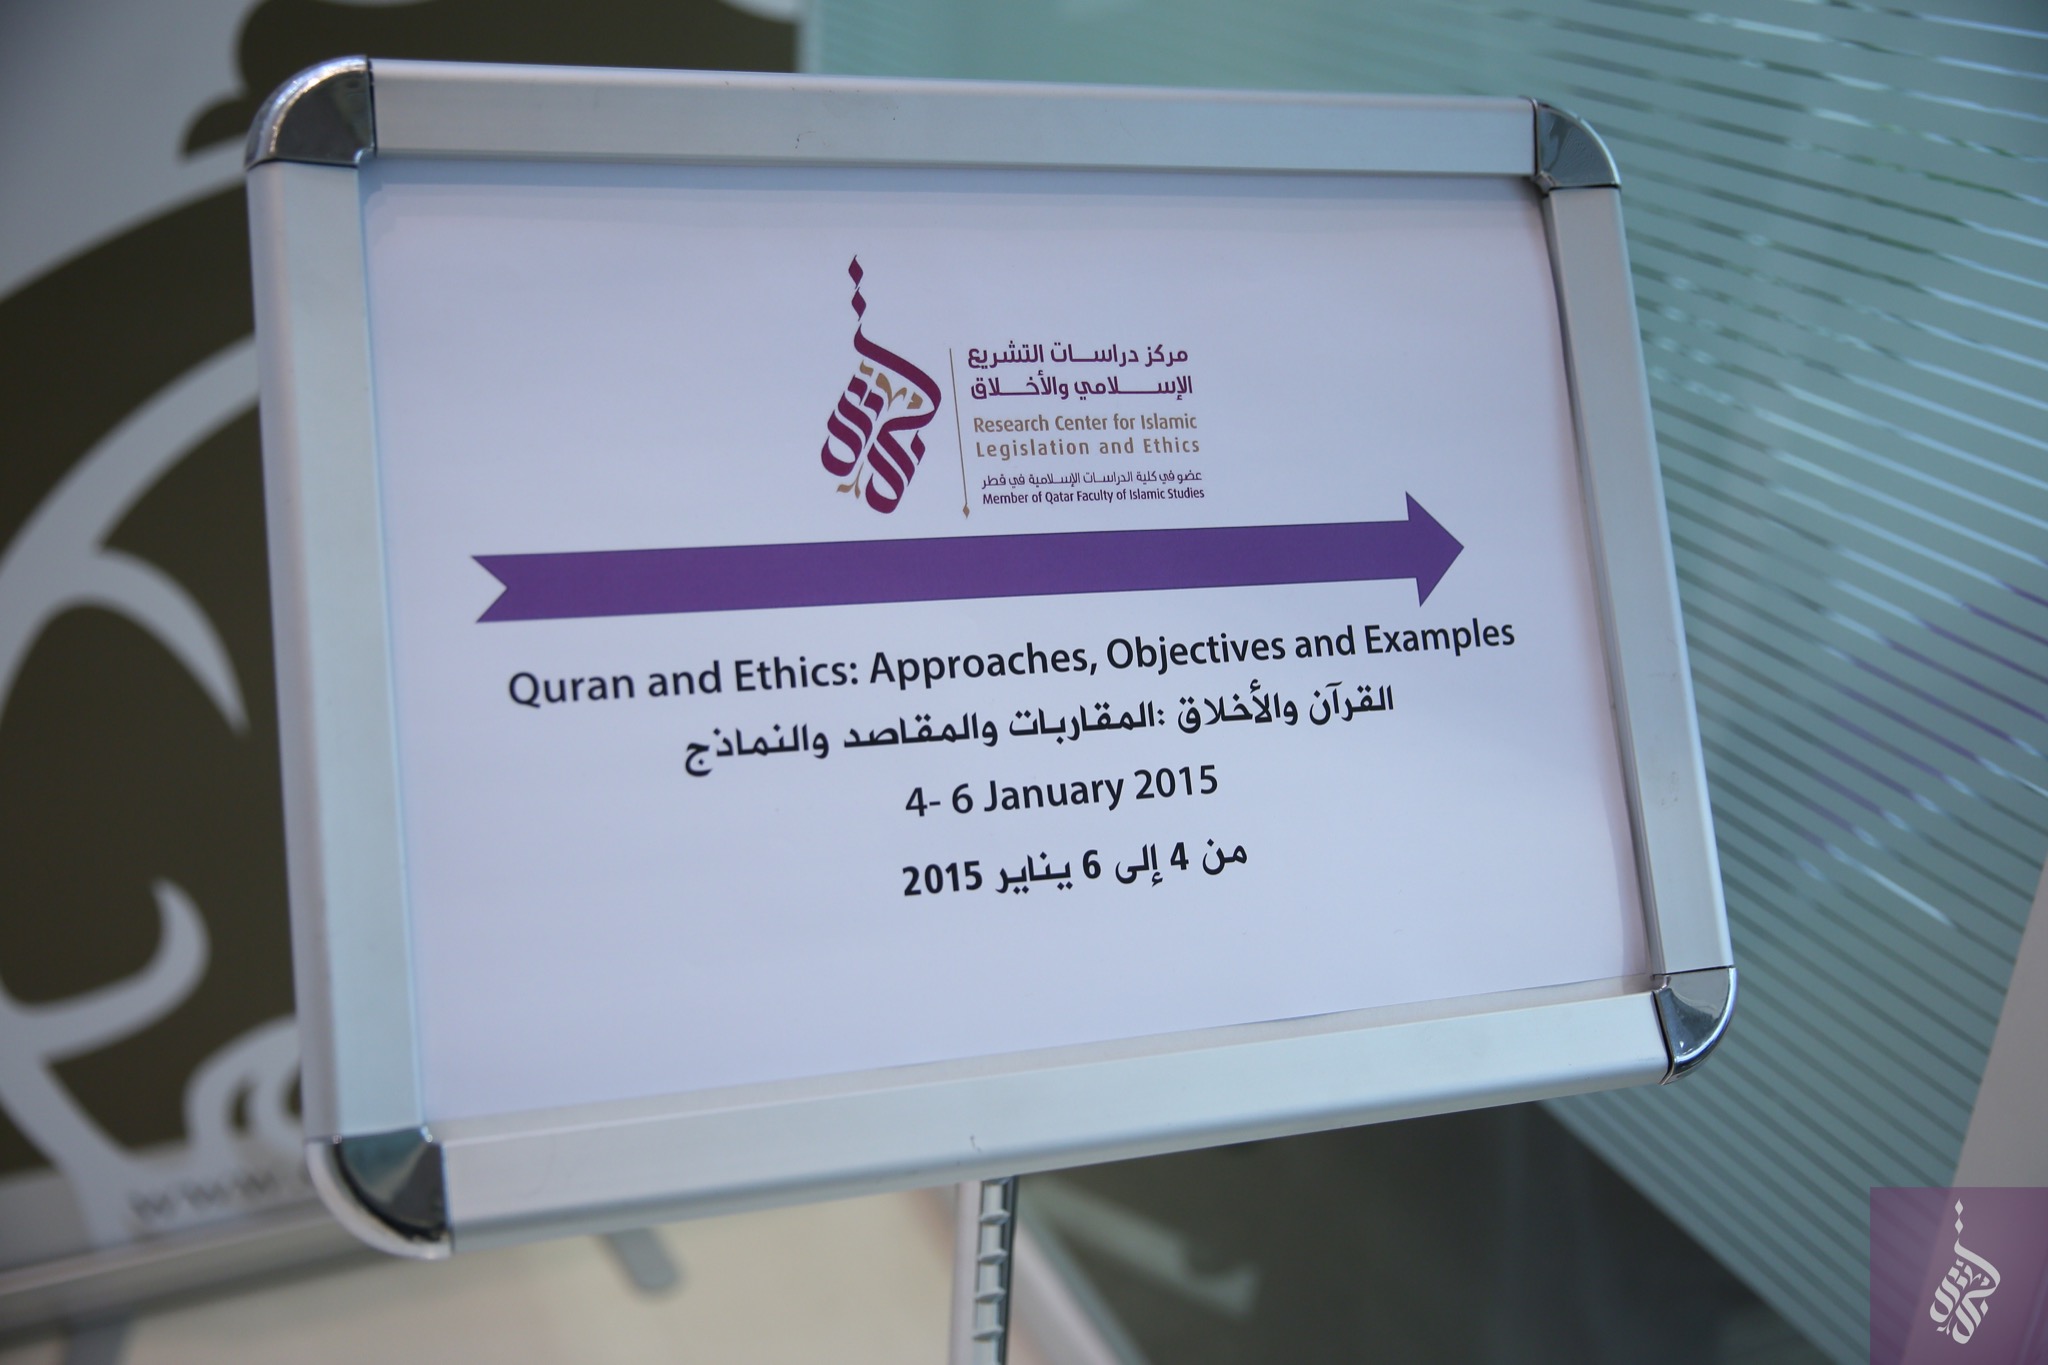 CILE Concludes Seminar on the Qura’n and Ethics 01/2015